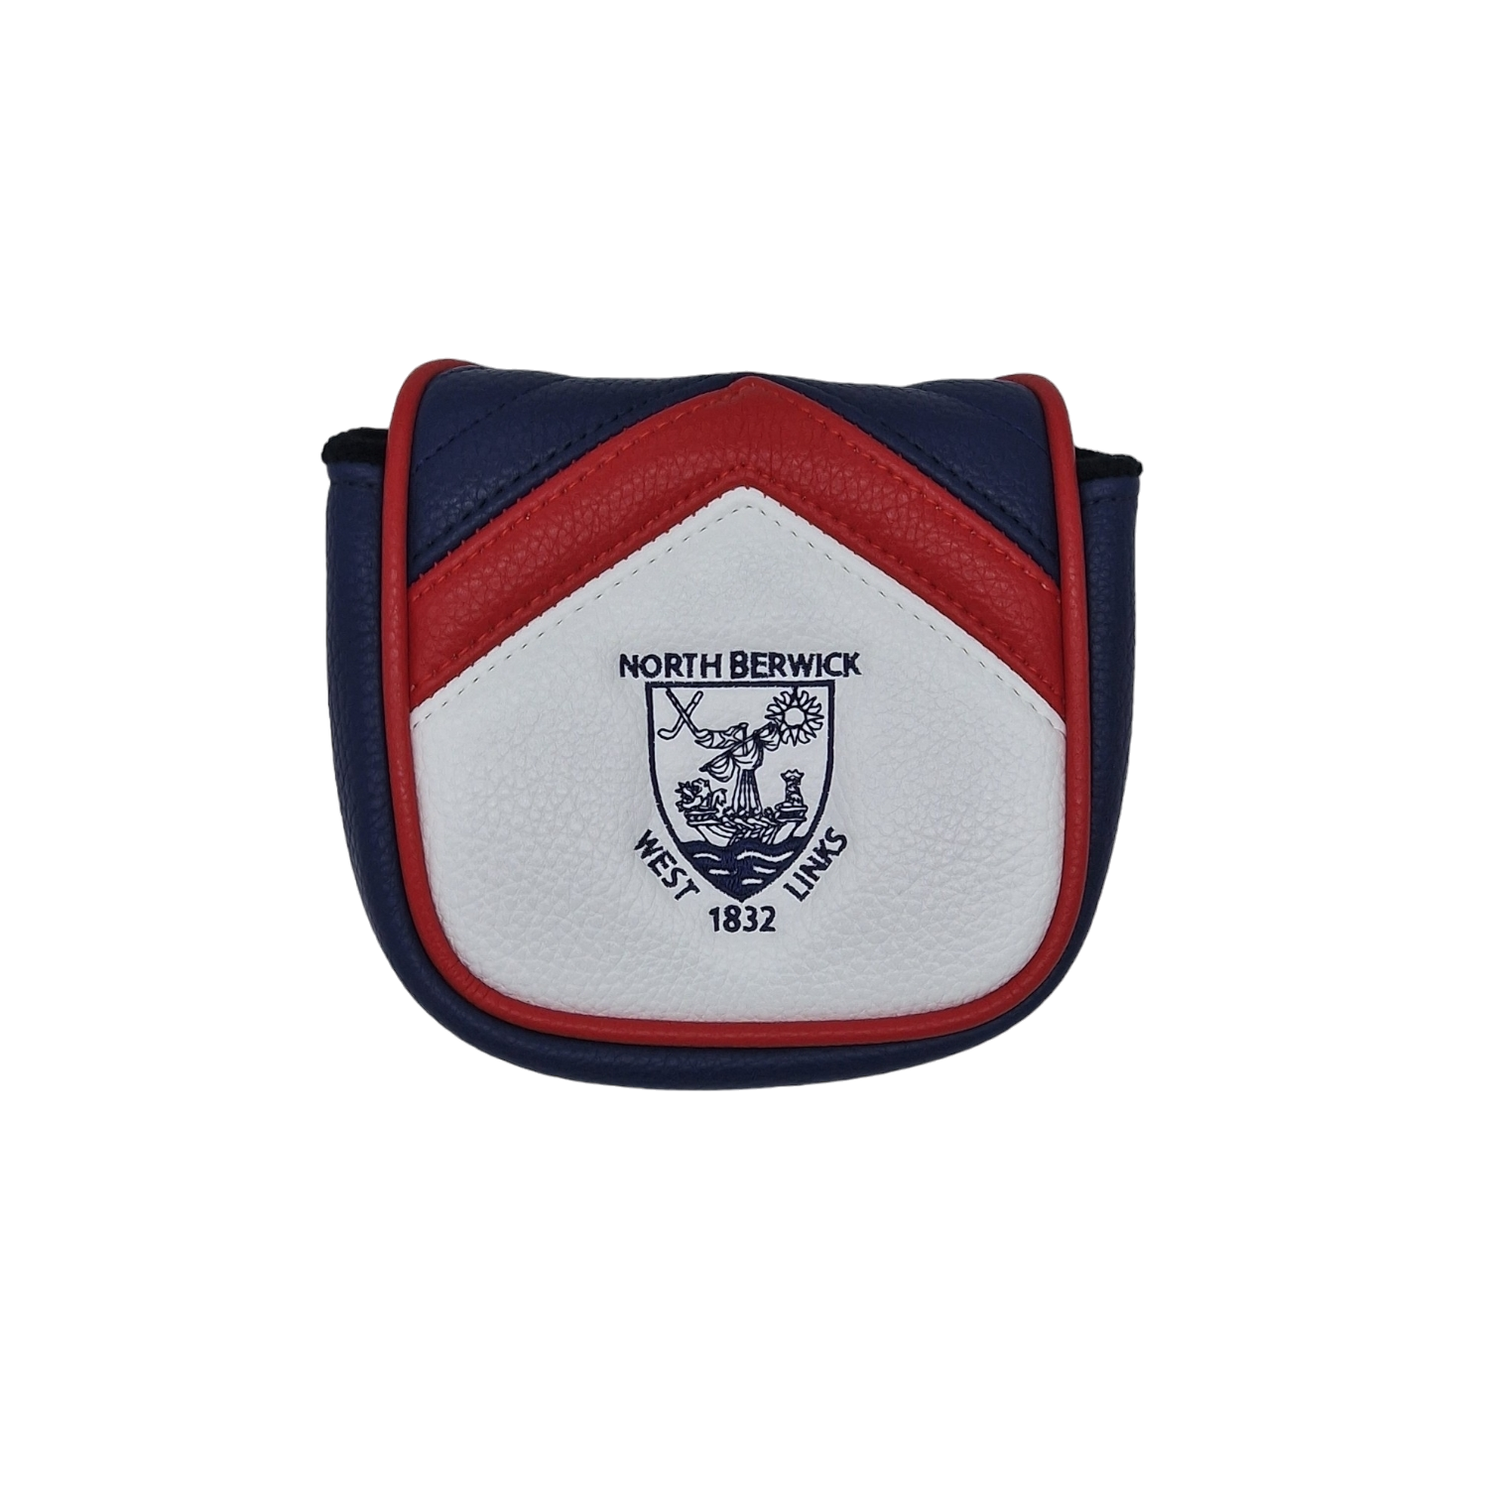 Red/White/Navy Mallet Putter Cover